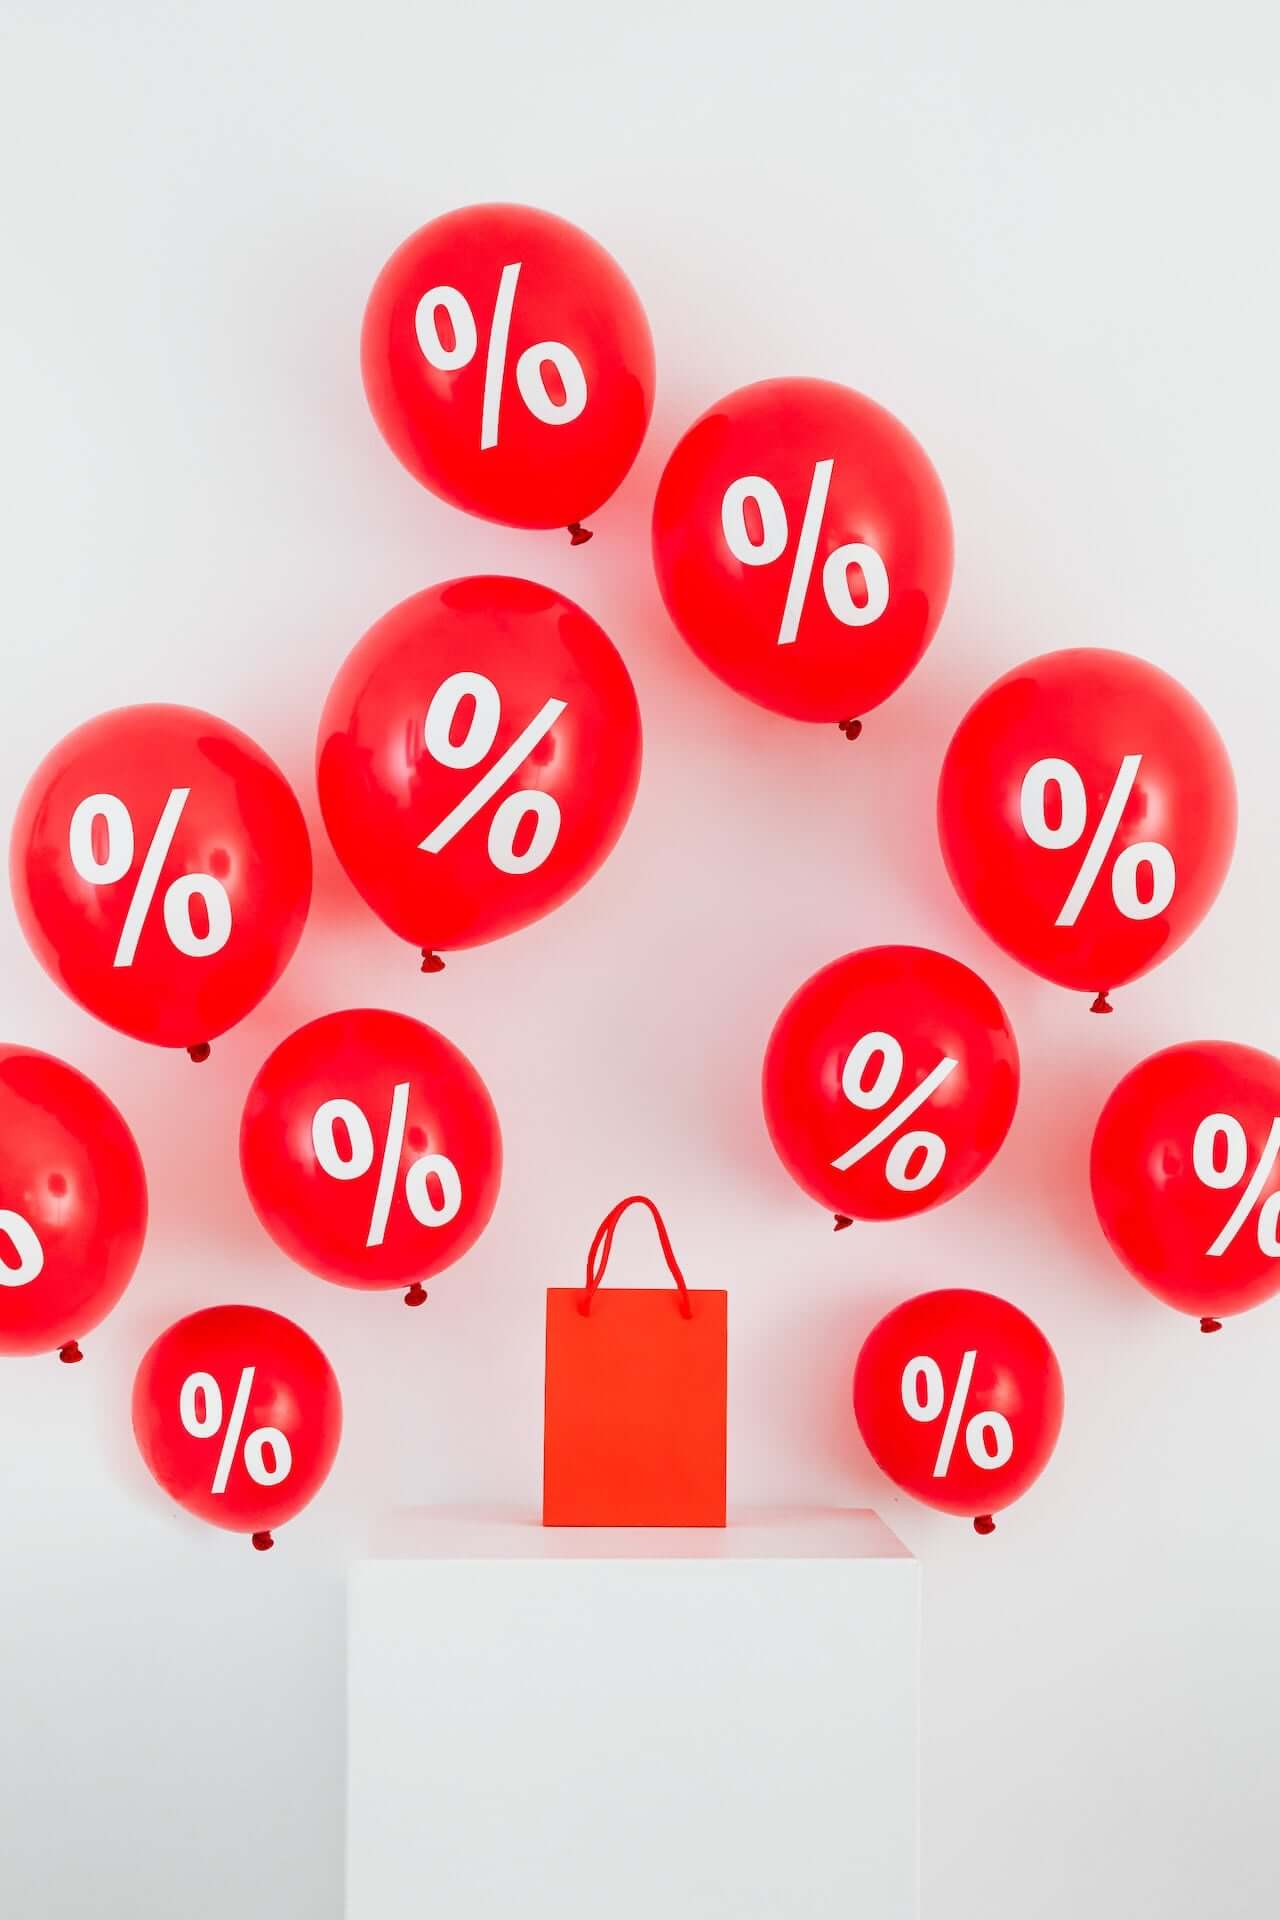 Mastering the Art of Online Shopping: Discount Strategies + More Tips